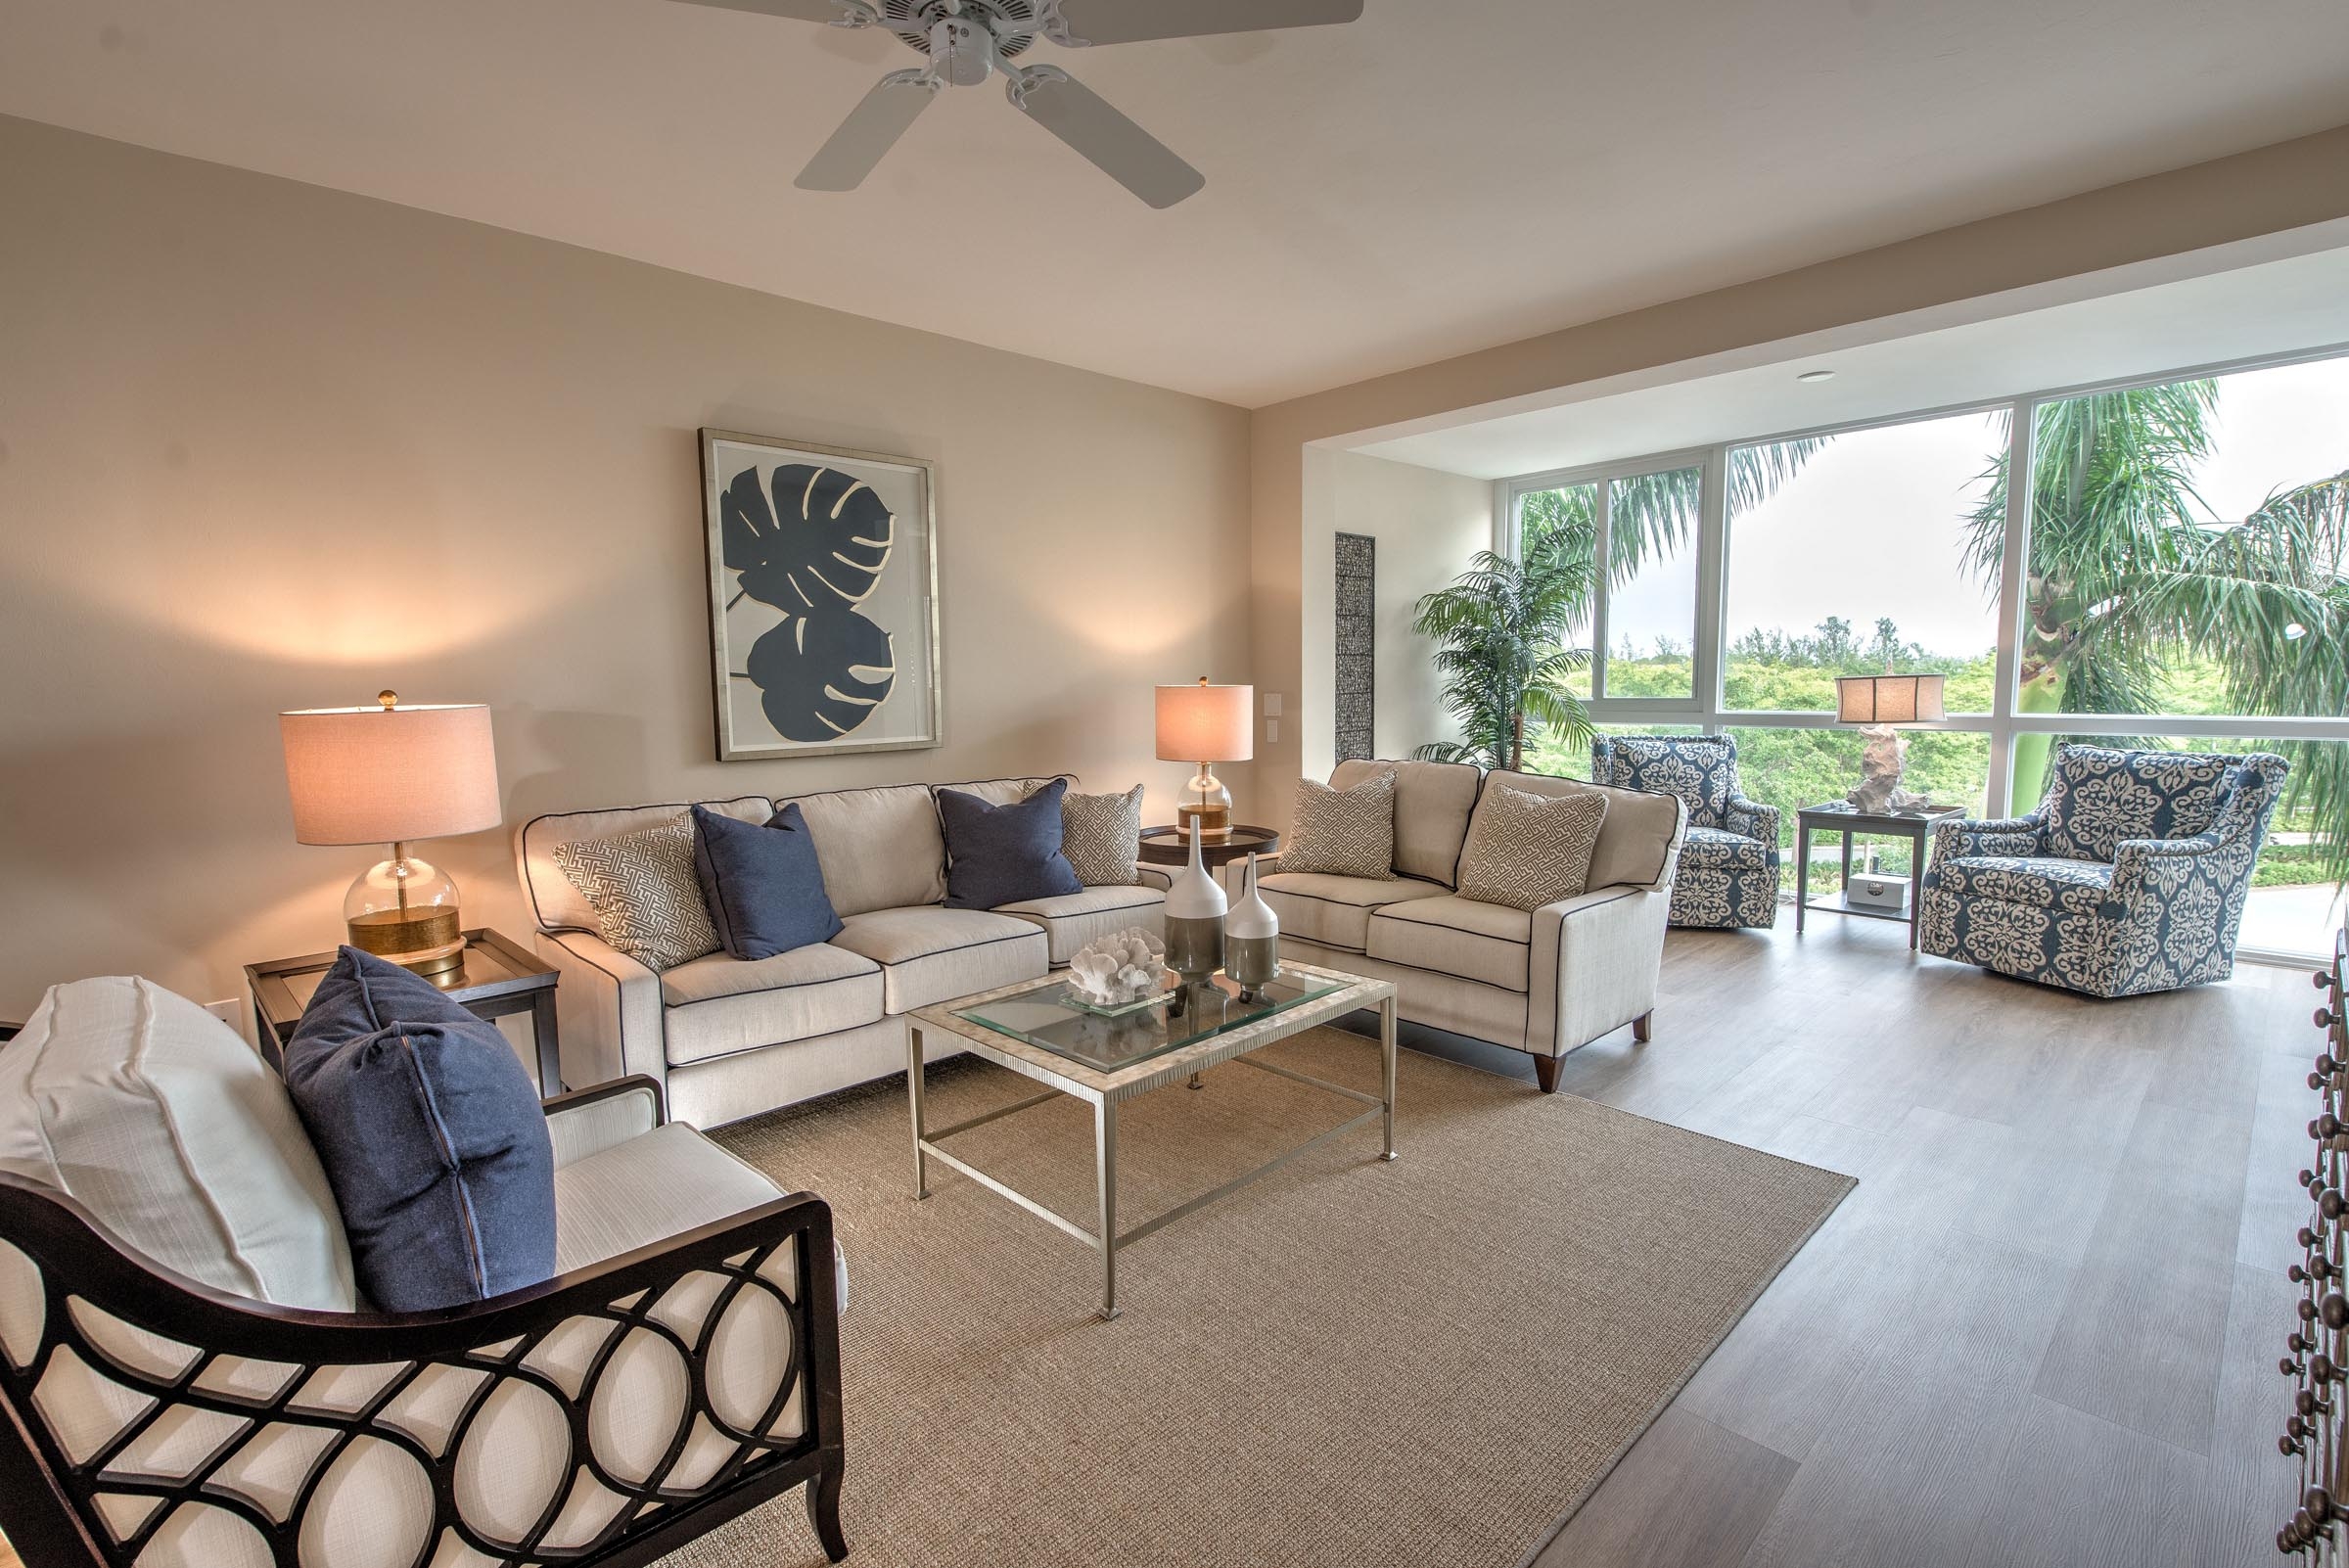 The living room at the Lakewood Model Home at Shell Point Retirement Community